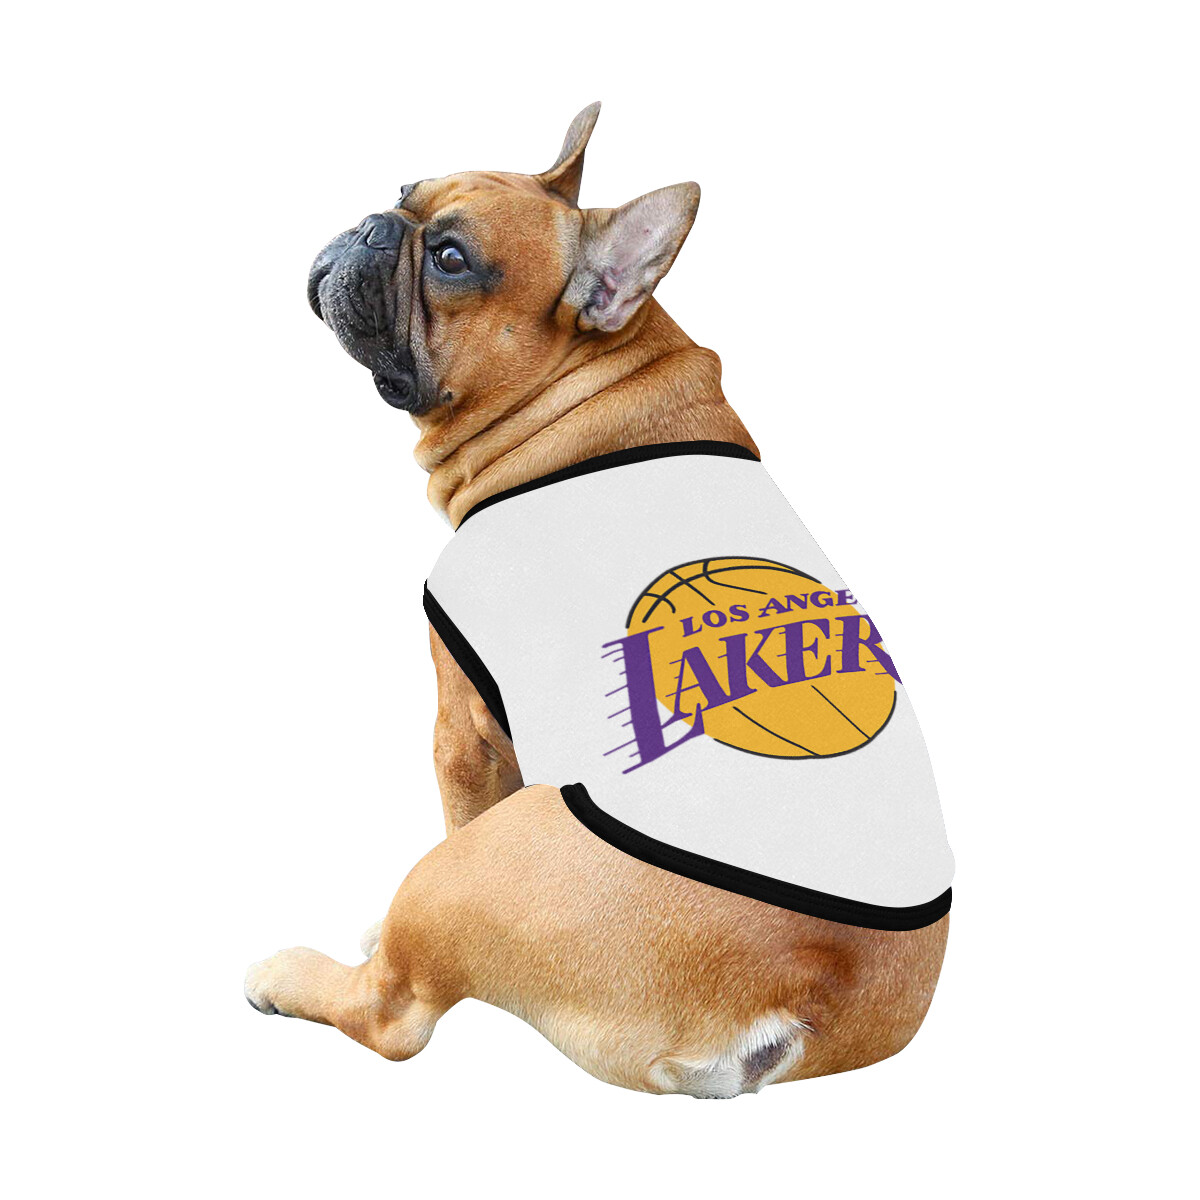 🐕 Lakers Dog shirt, Dog Tank Top, Dog t-shirt, Dog clothes, Gifts, front back print, 7 sizes XS to 3XL, dog gifts, white